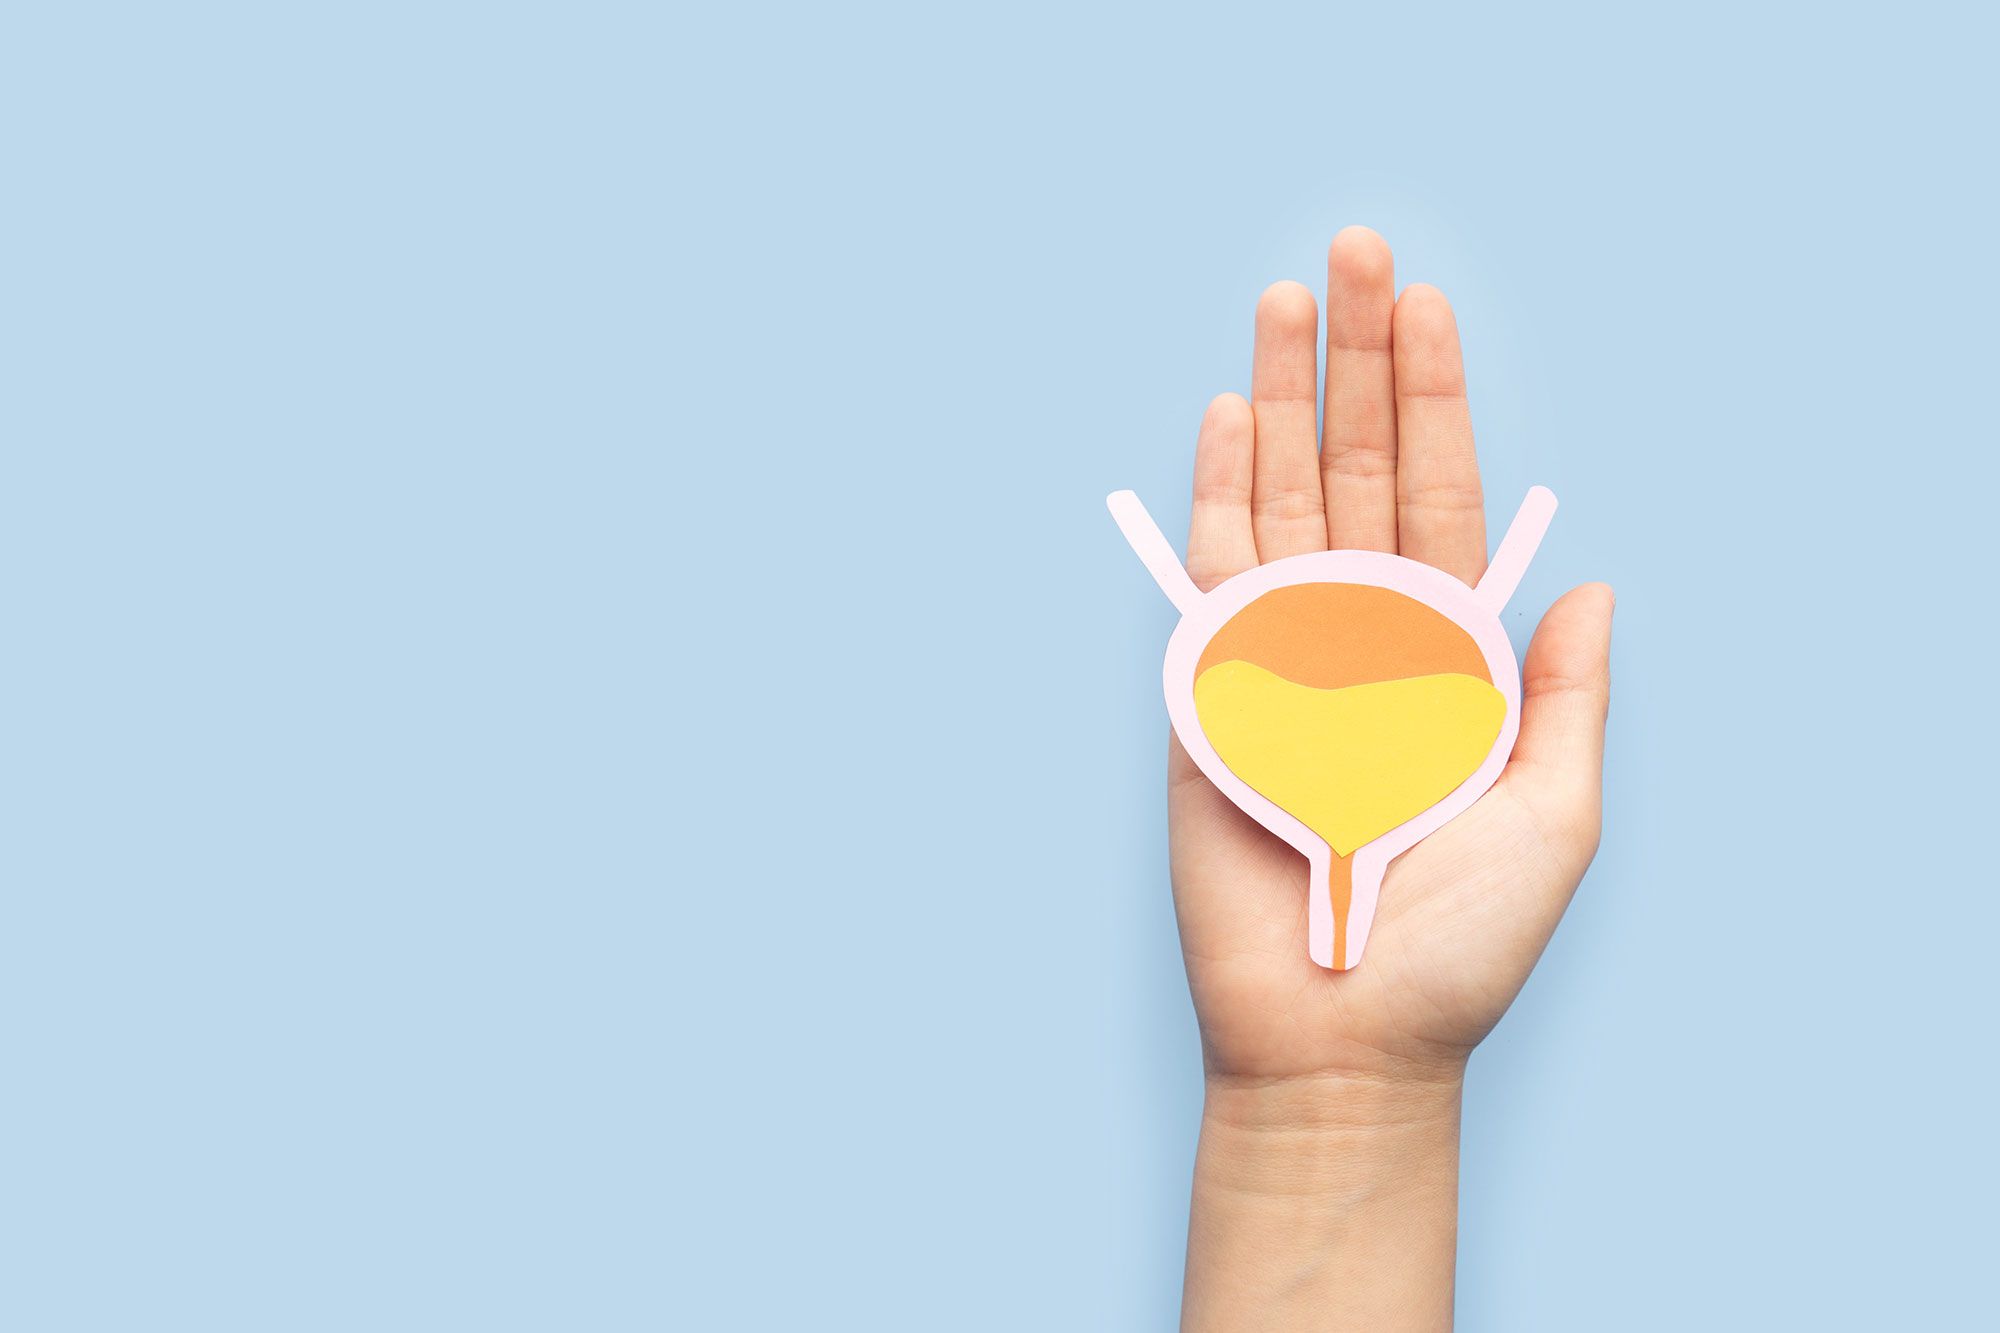 A hand holding a toy uterus on a blue background